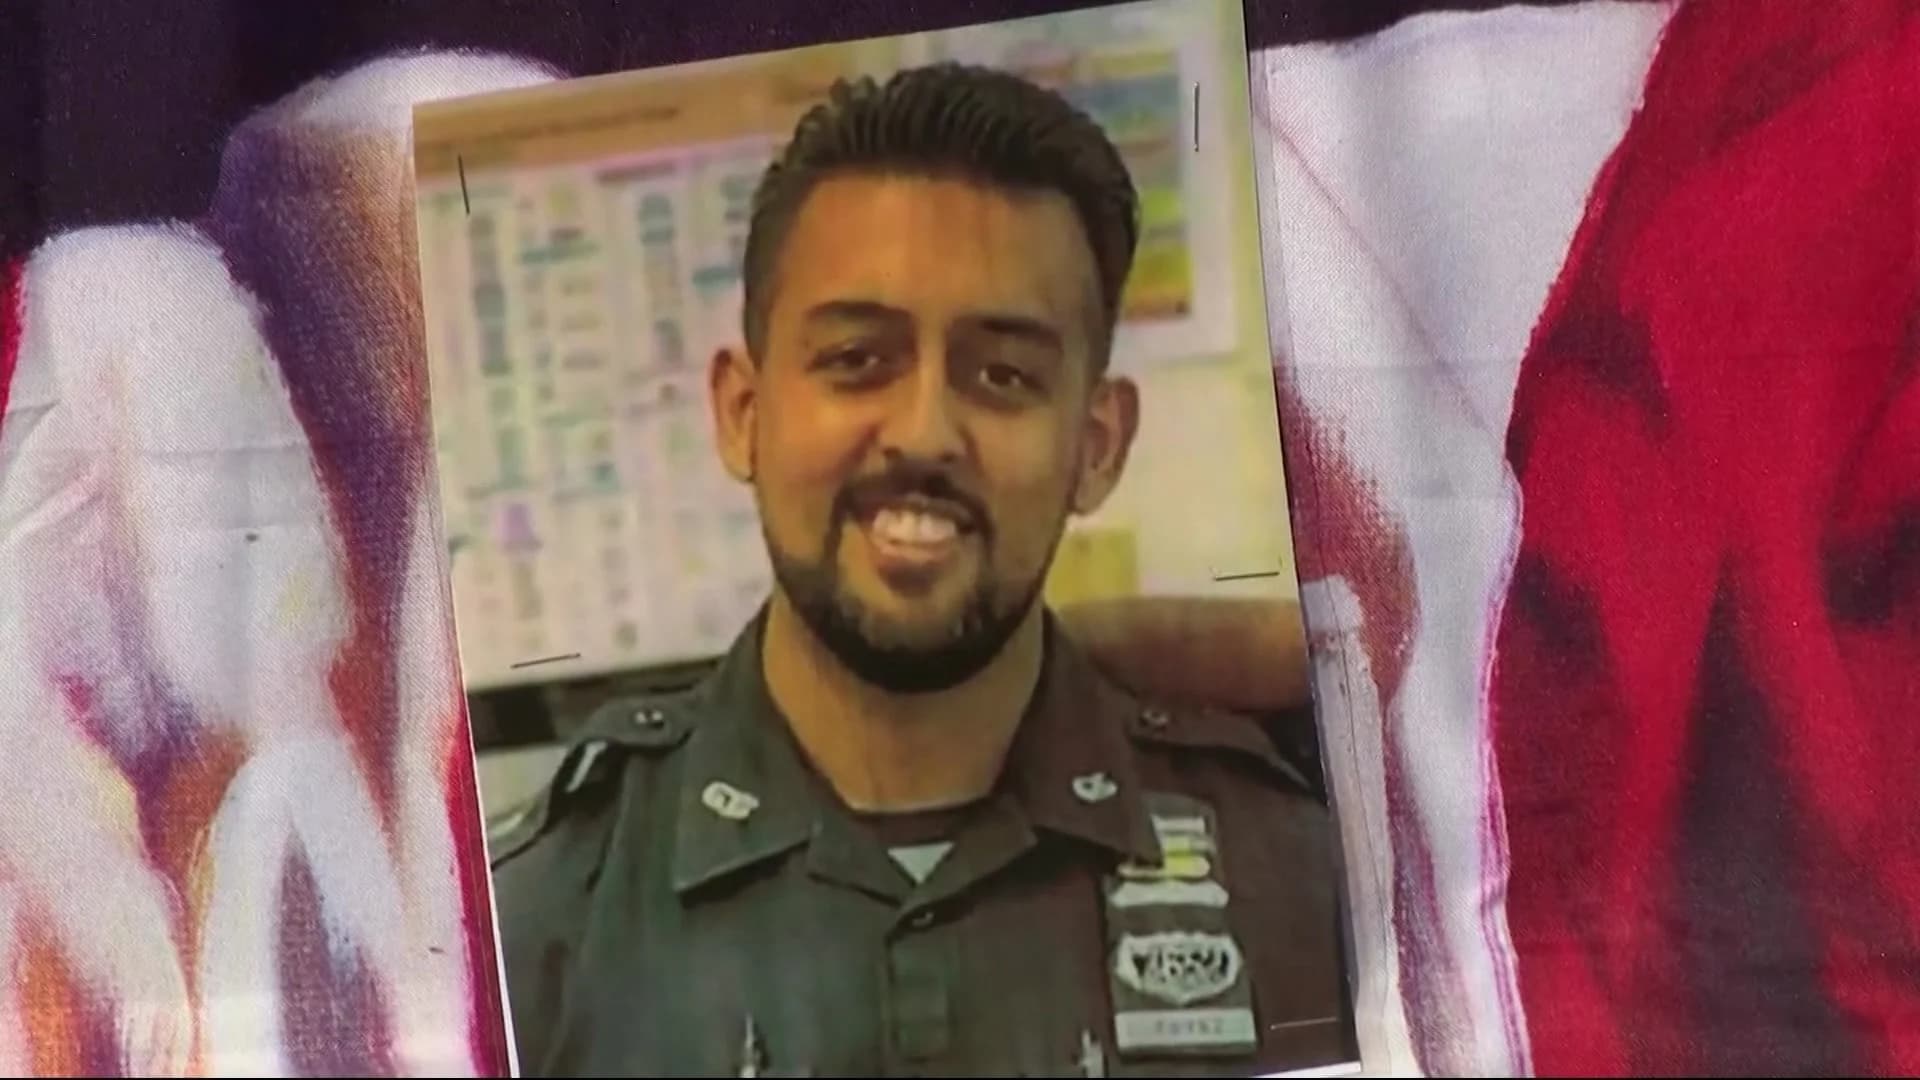 Live Video: Funeral for NYPD officer Adeed Fayaz